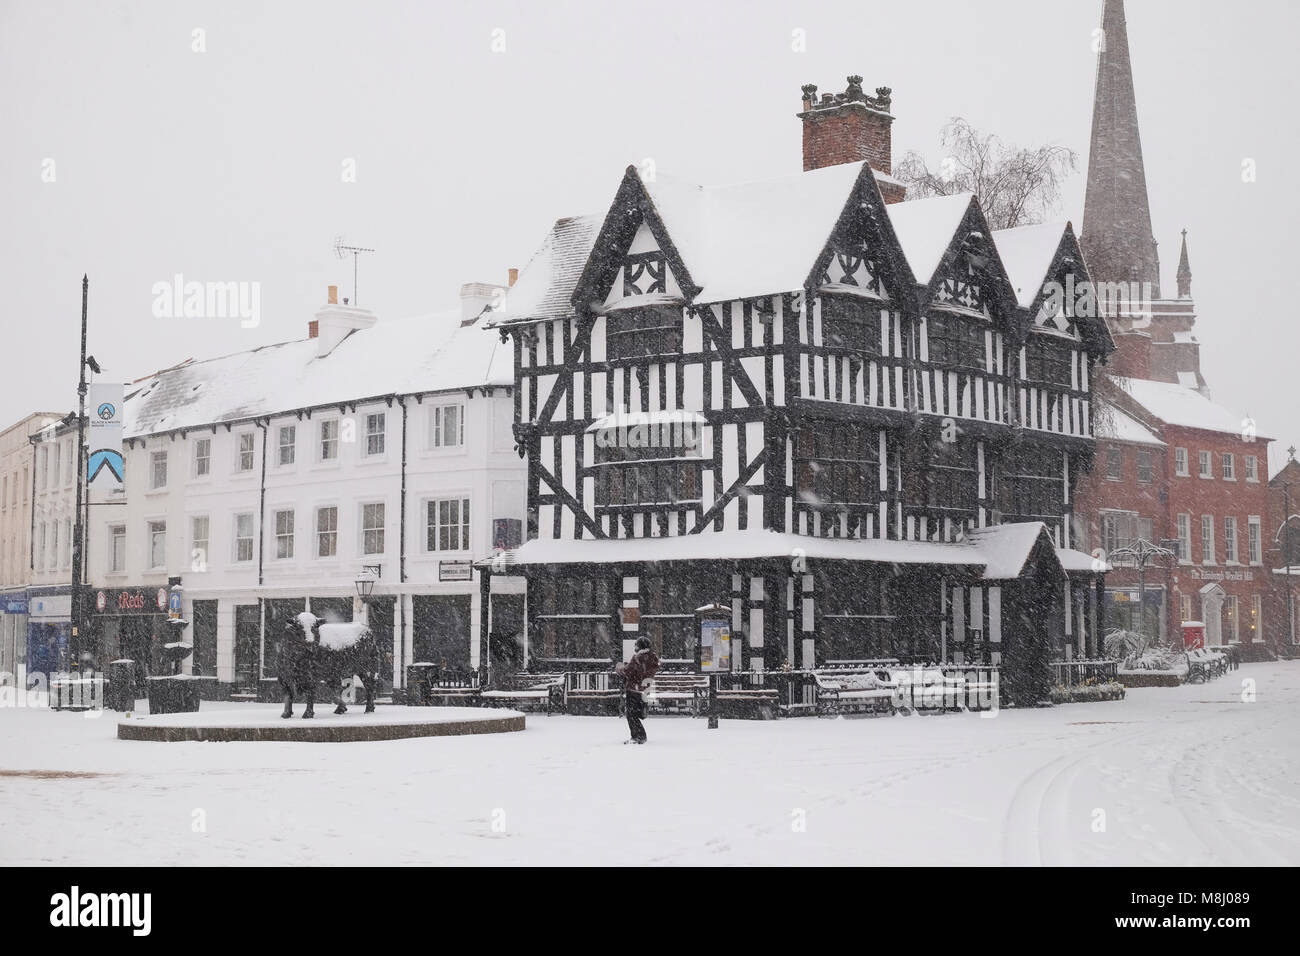 Hereford, Herefordshire, UK - Sunday 18th March 2018 - Hereford heavy snowfall overnight continues during Sunday morning  - the historic "Black and White House" dating from 1621 in the city centre High Town area covered in snow - Steven May /Alamy Live News Stock Photo